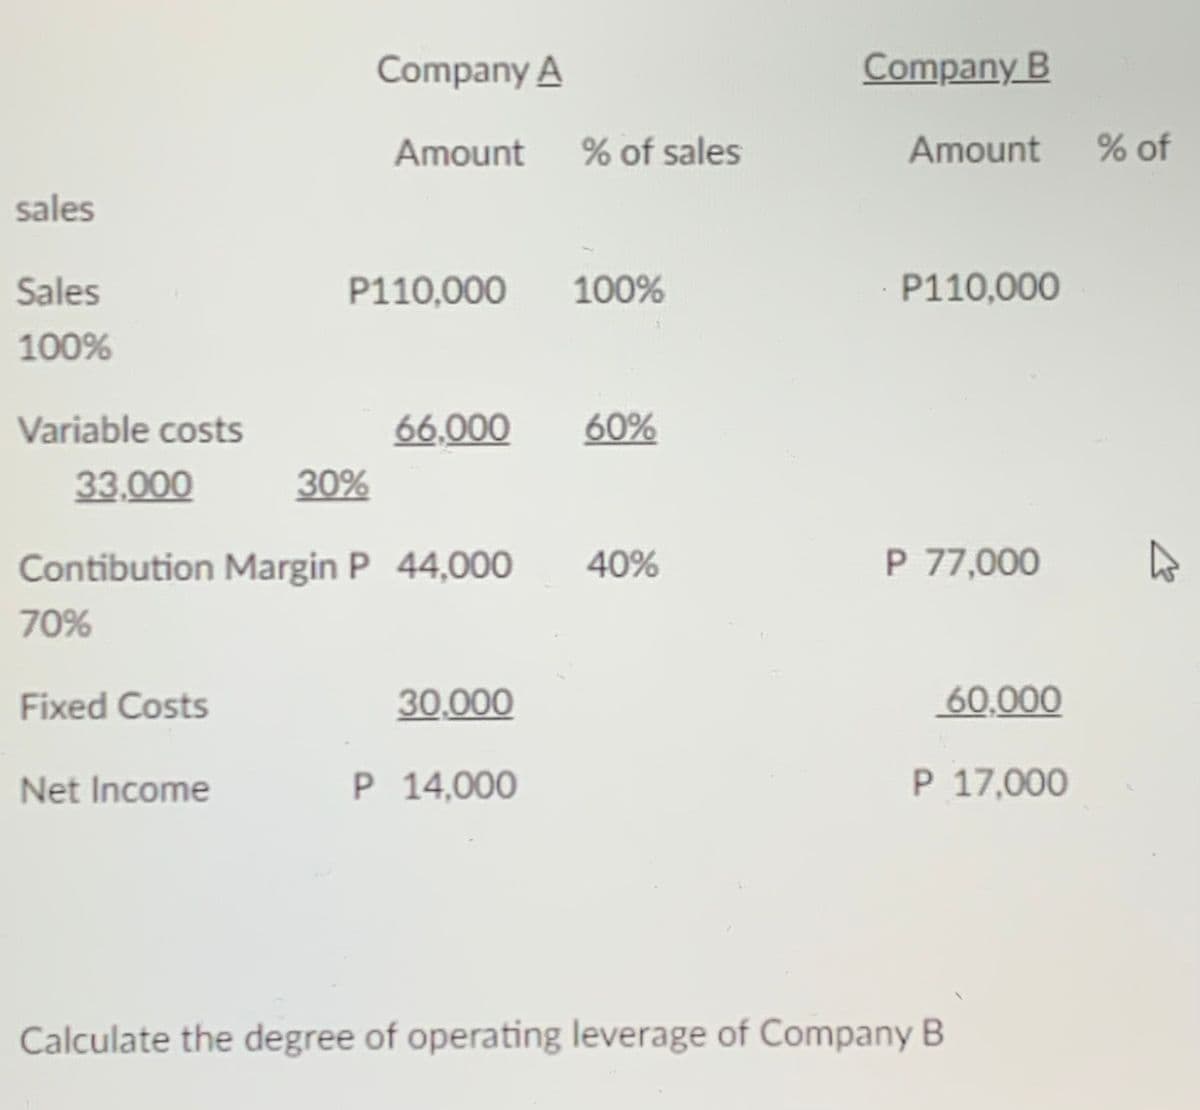 sales
Sales
100%
Company A
Amount % of sales
P110,000
Variable costs
33,000
Contibution Margin P 44,000
70%
Fixed Costs
Net Income
30%
66.000
30,000
P 14,000
100%
60%
40%
Company B
Amount % of
P110,000
P 77,000
60,000
P 17,000
Calculate the degree of operating leverage of Company B